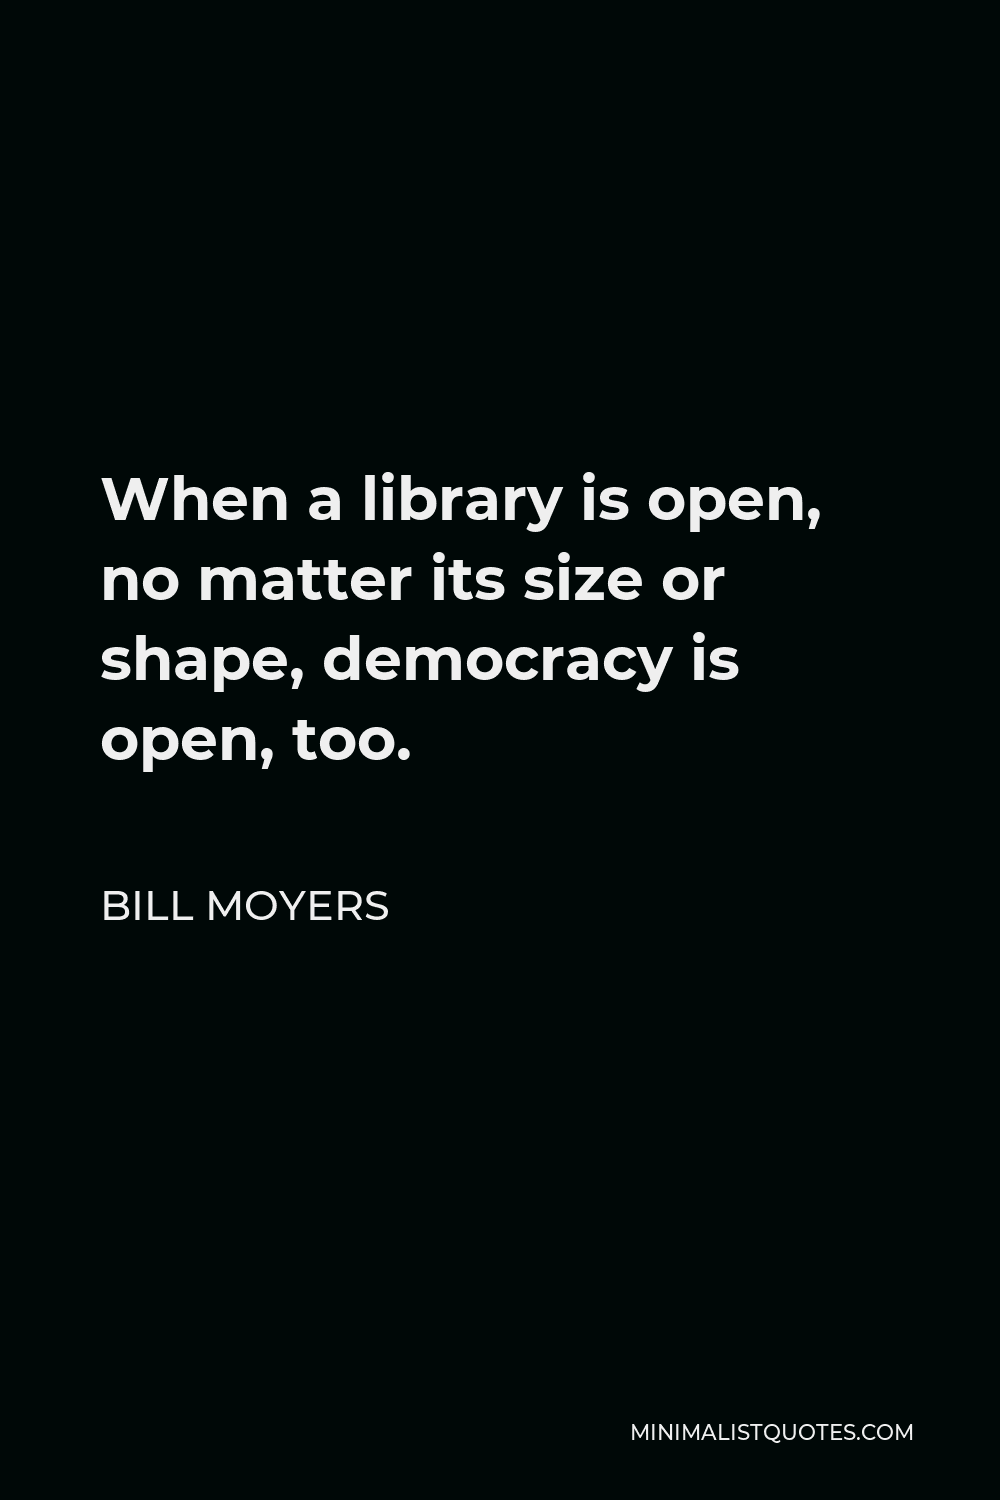 Bill Moyers Quote - When a library is open, no matter its size or shape, democracy is open, too.